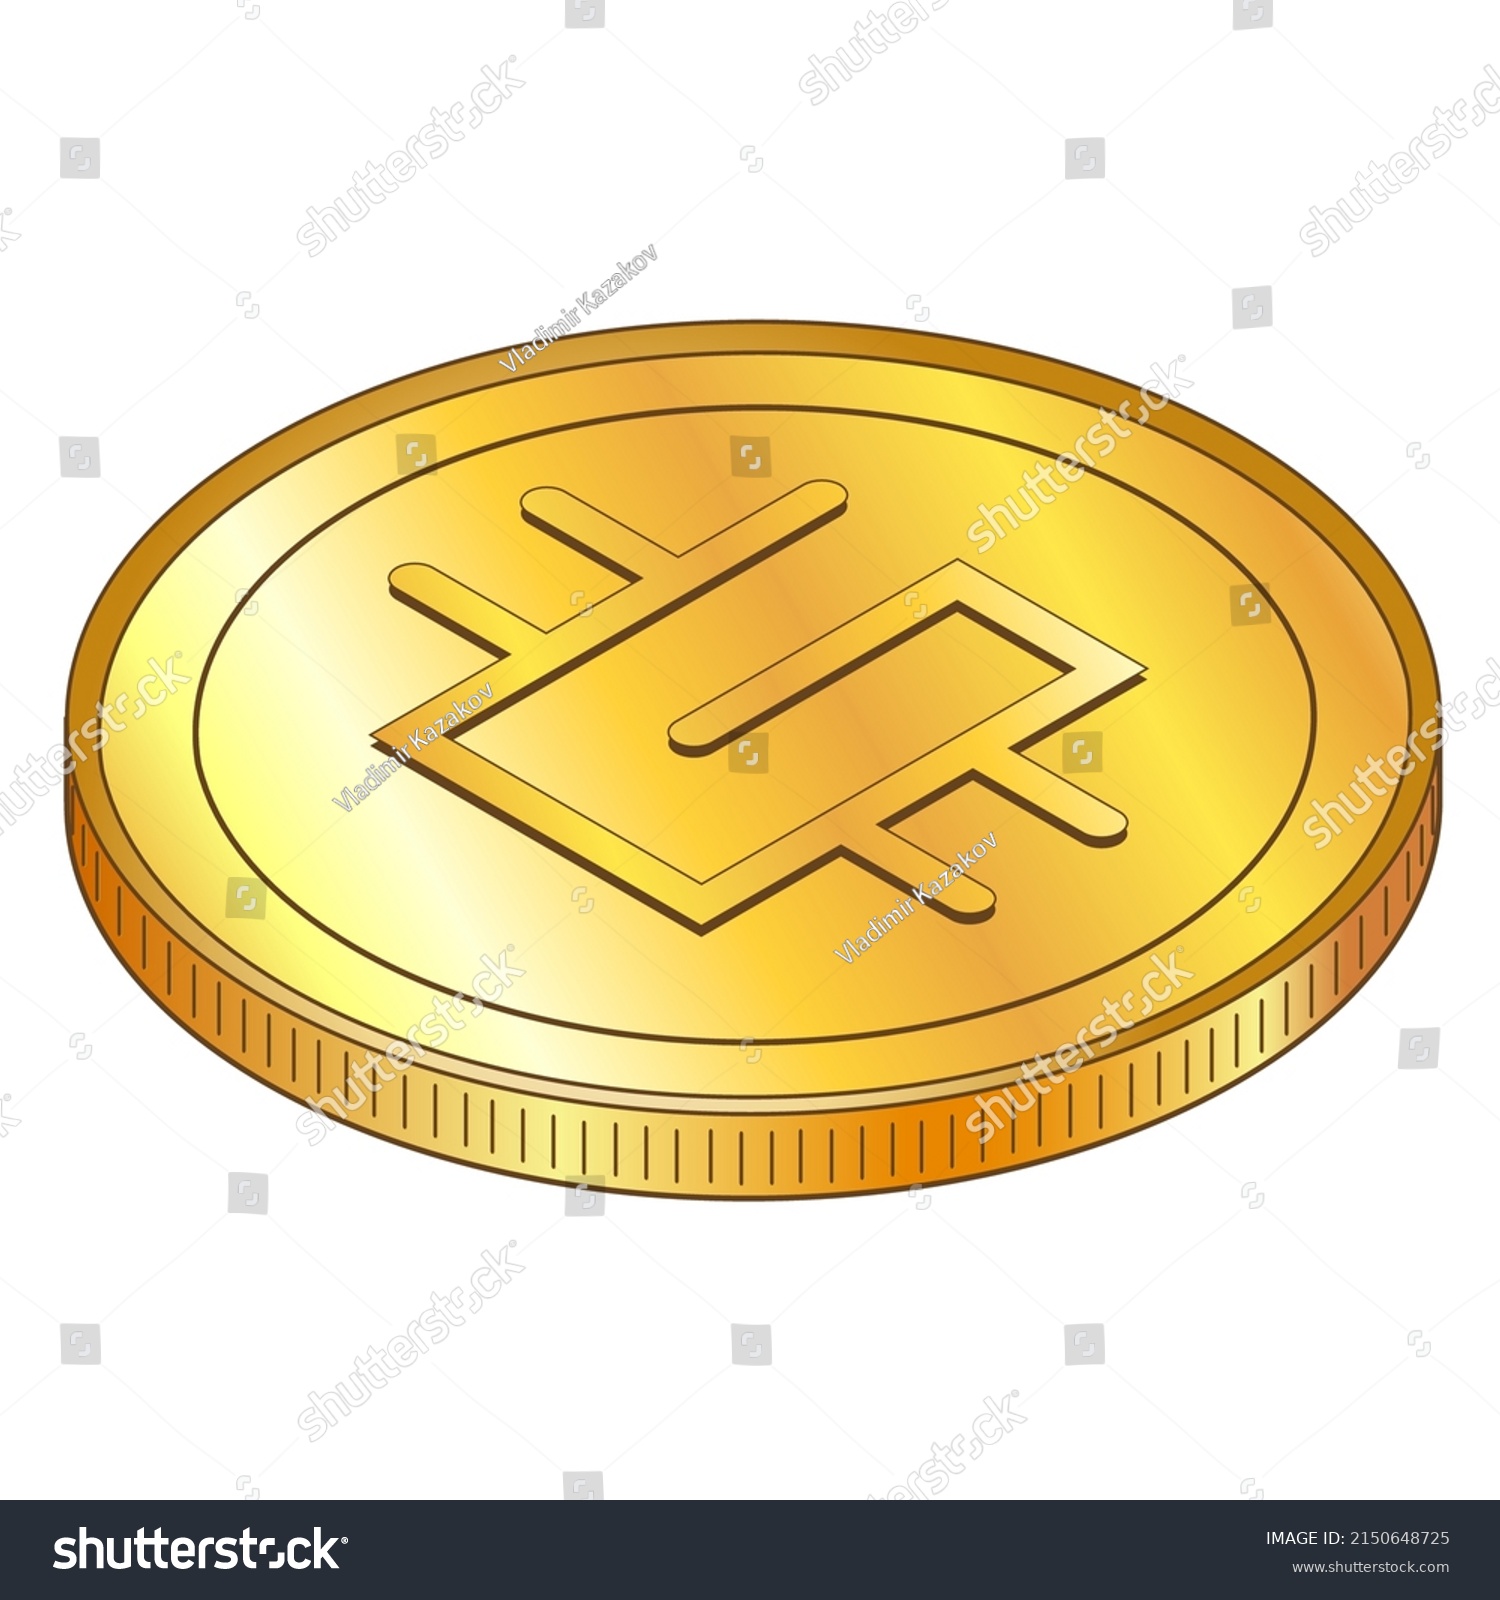 SVG of Golden coin Stepn GMT in isometric view isolated on white. Vector illustration. svg